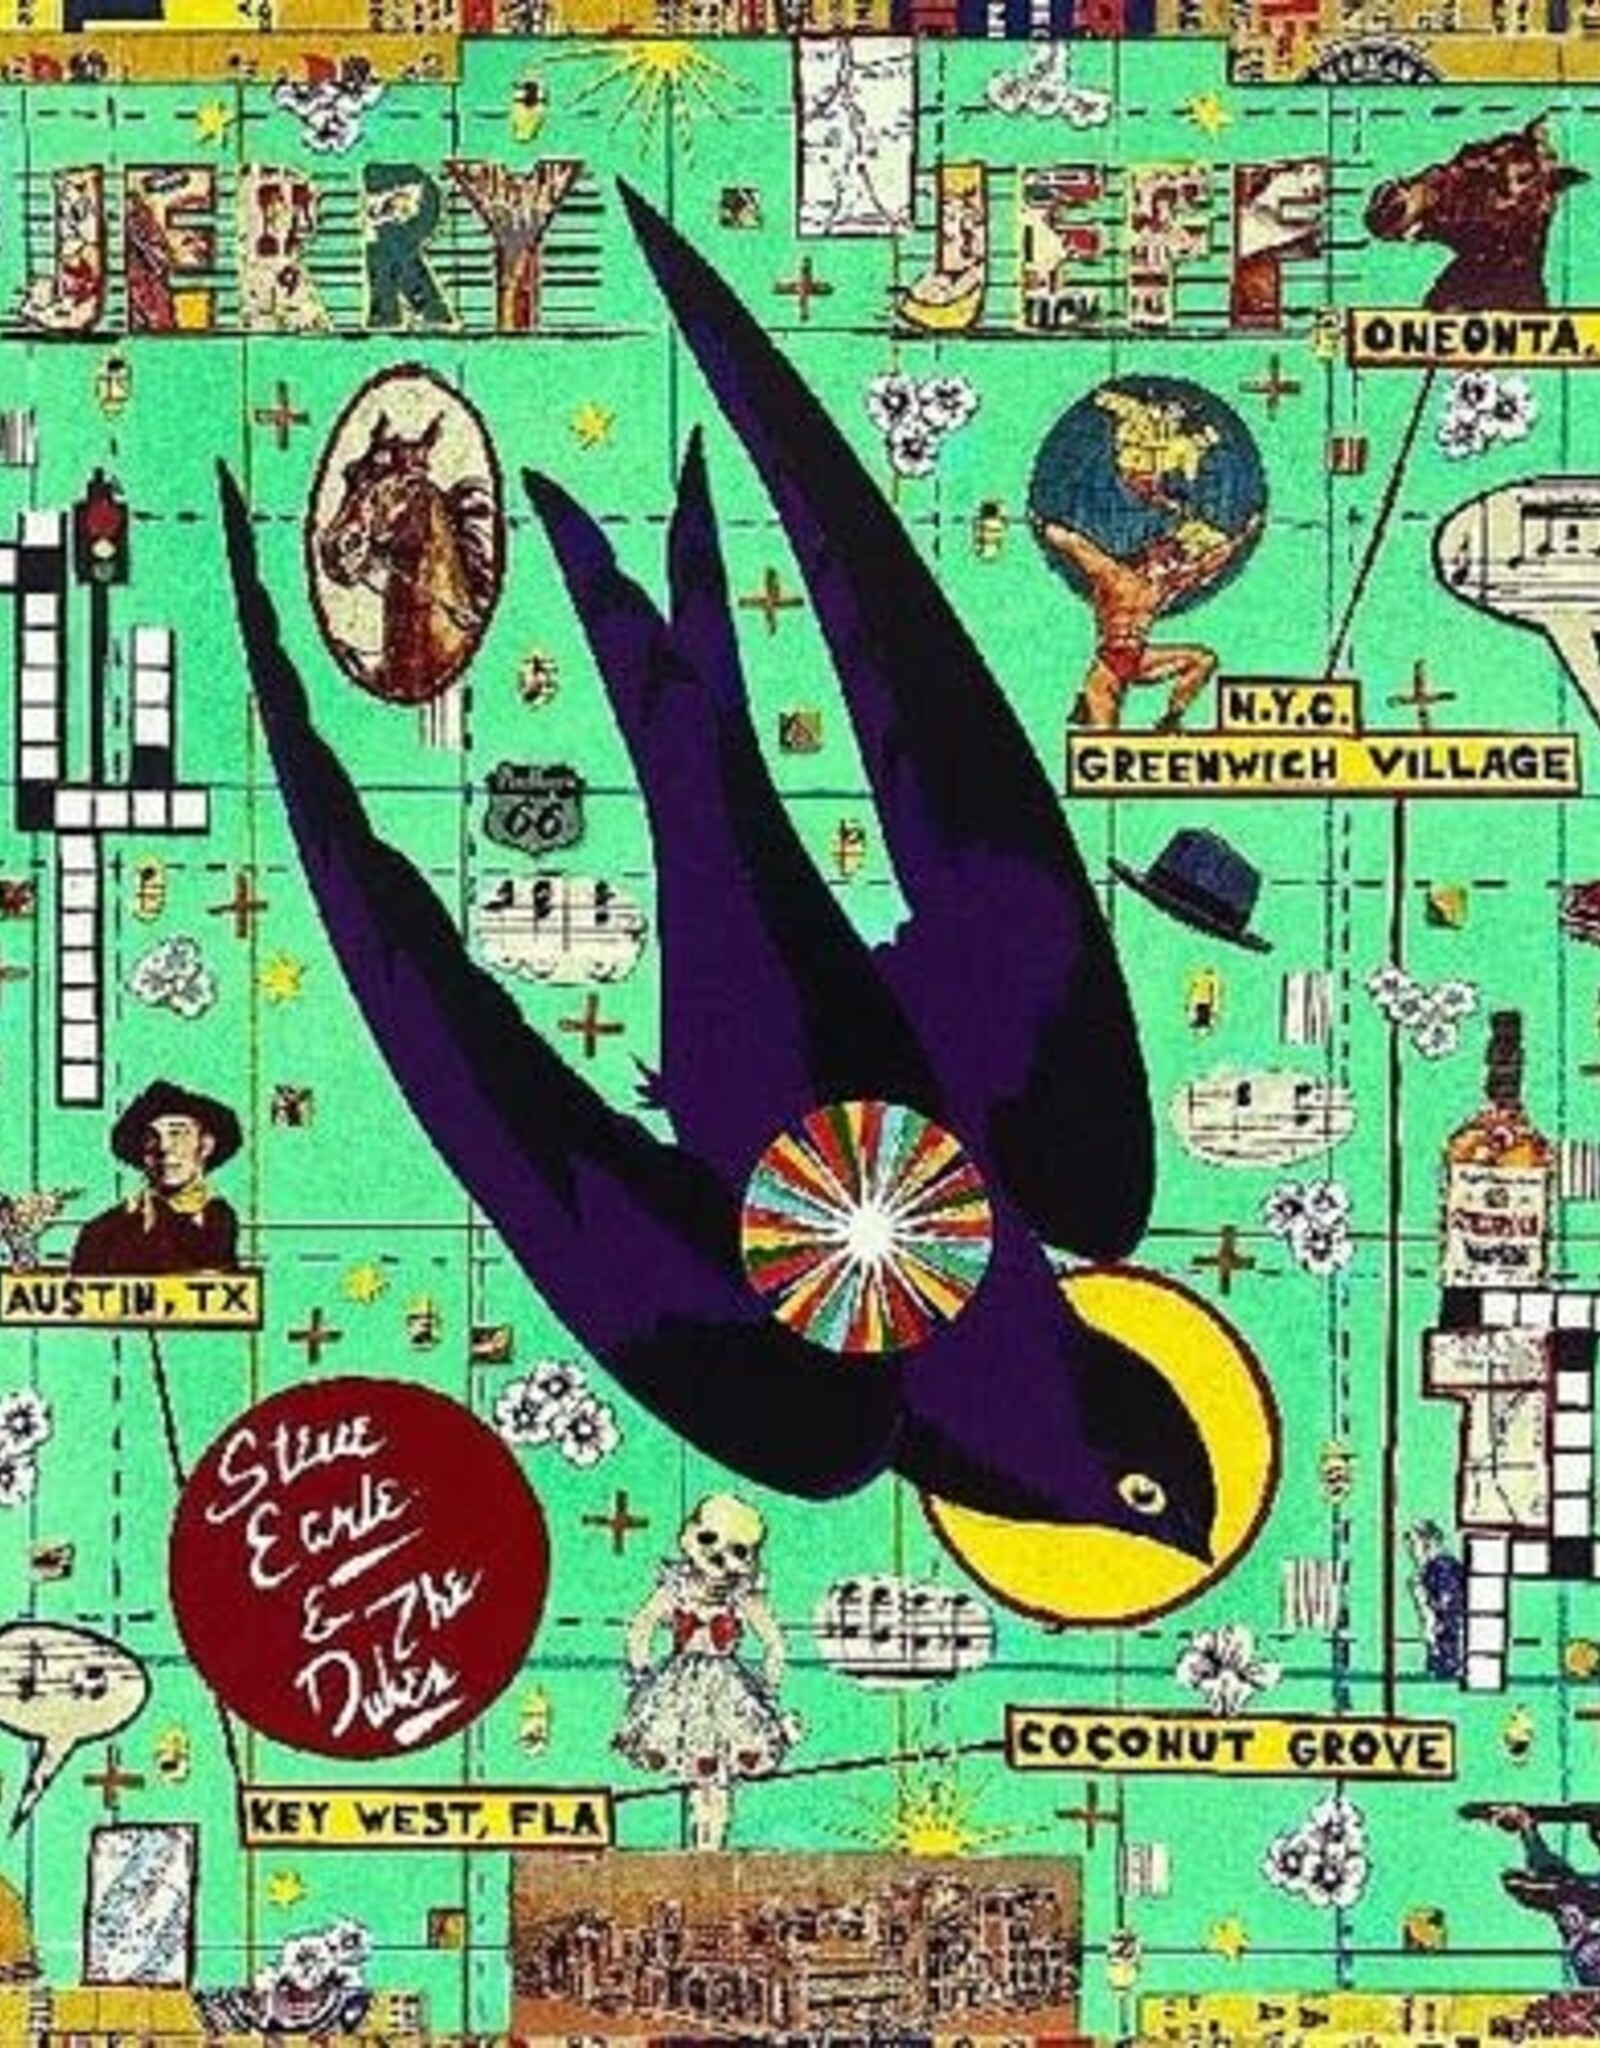 Steve Earle And The Dukes - JERRY JEFF (INDIE EXCLUSIVE, CLEAR VINYL)